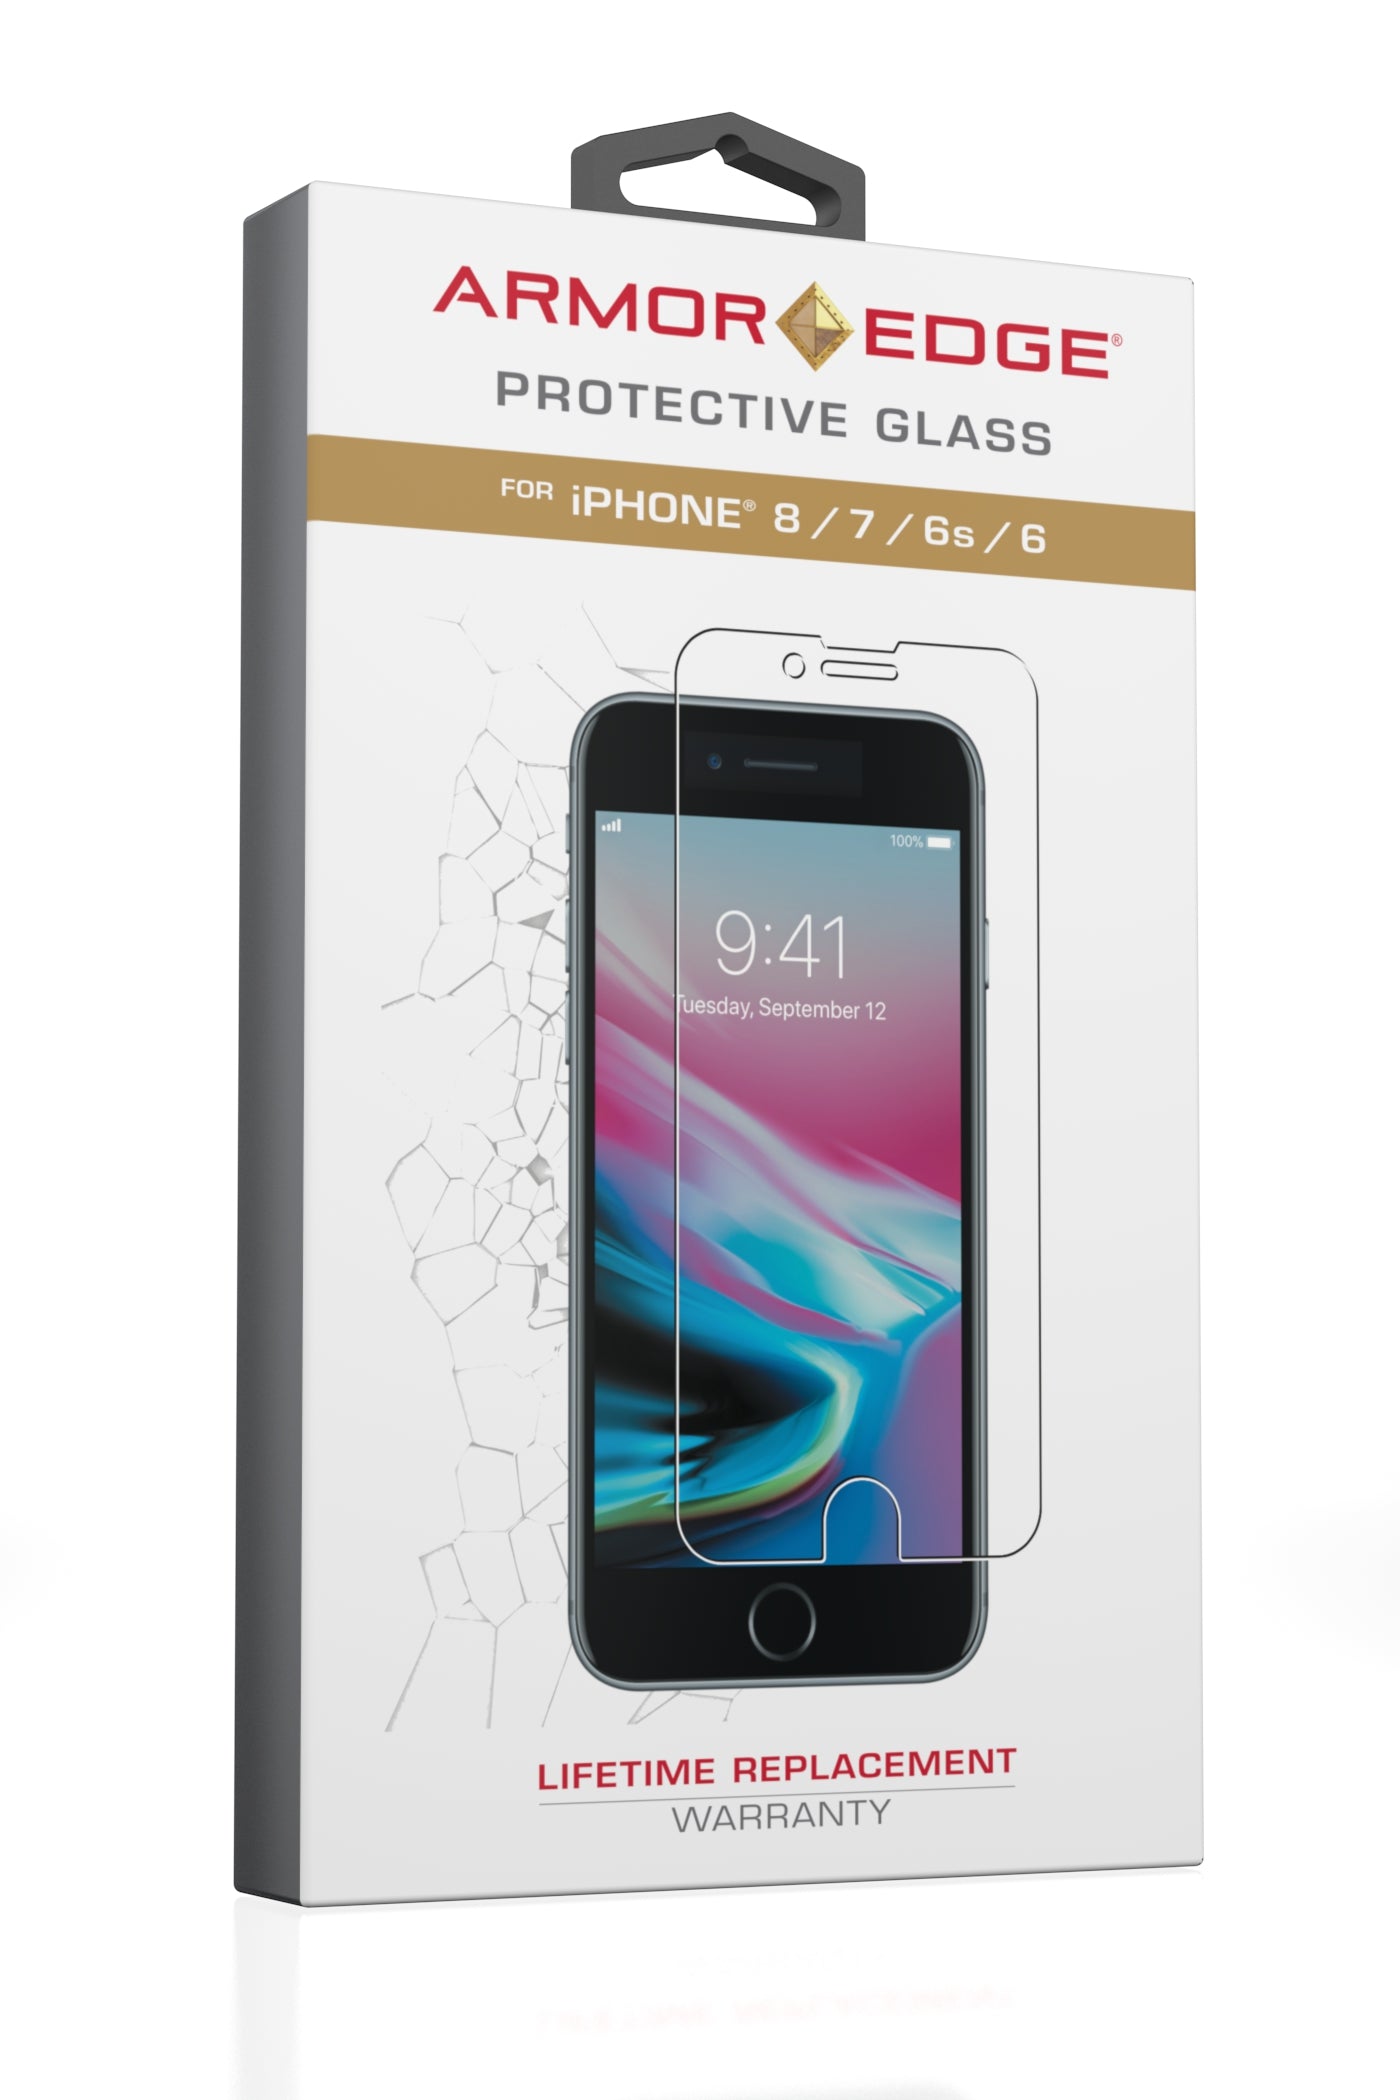 Armor Edge - Protective Glass for iPhone 6 / 6S / 7 / 8